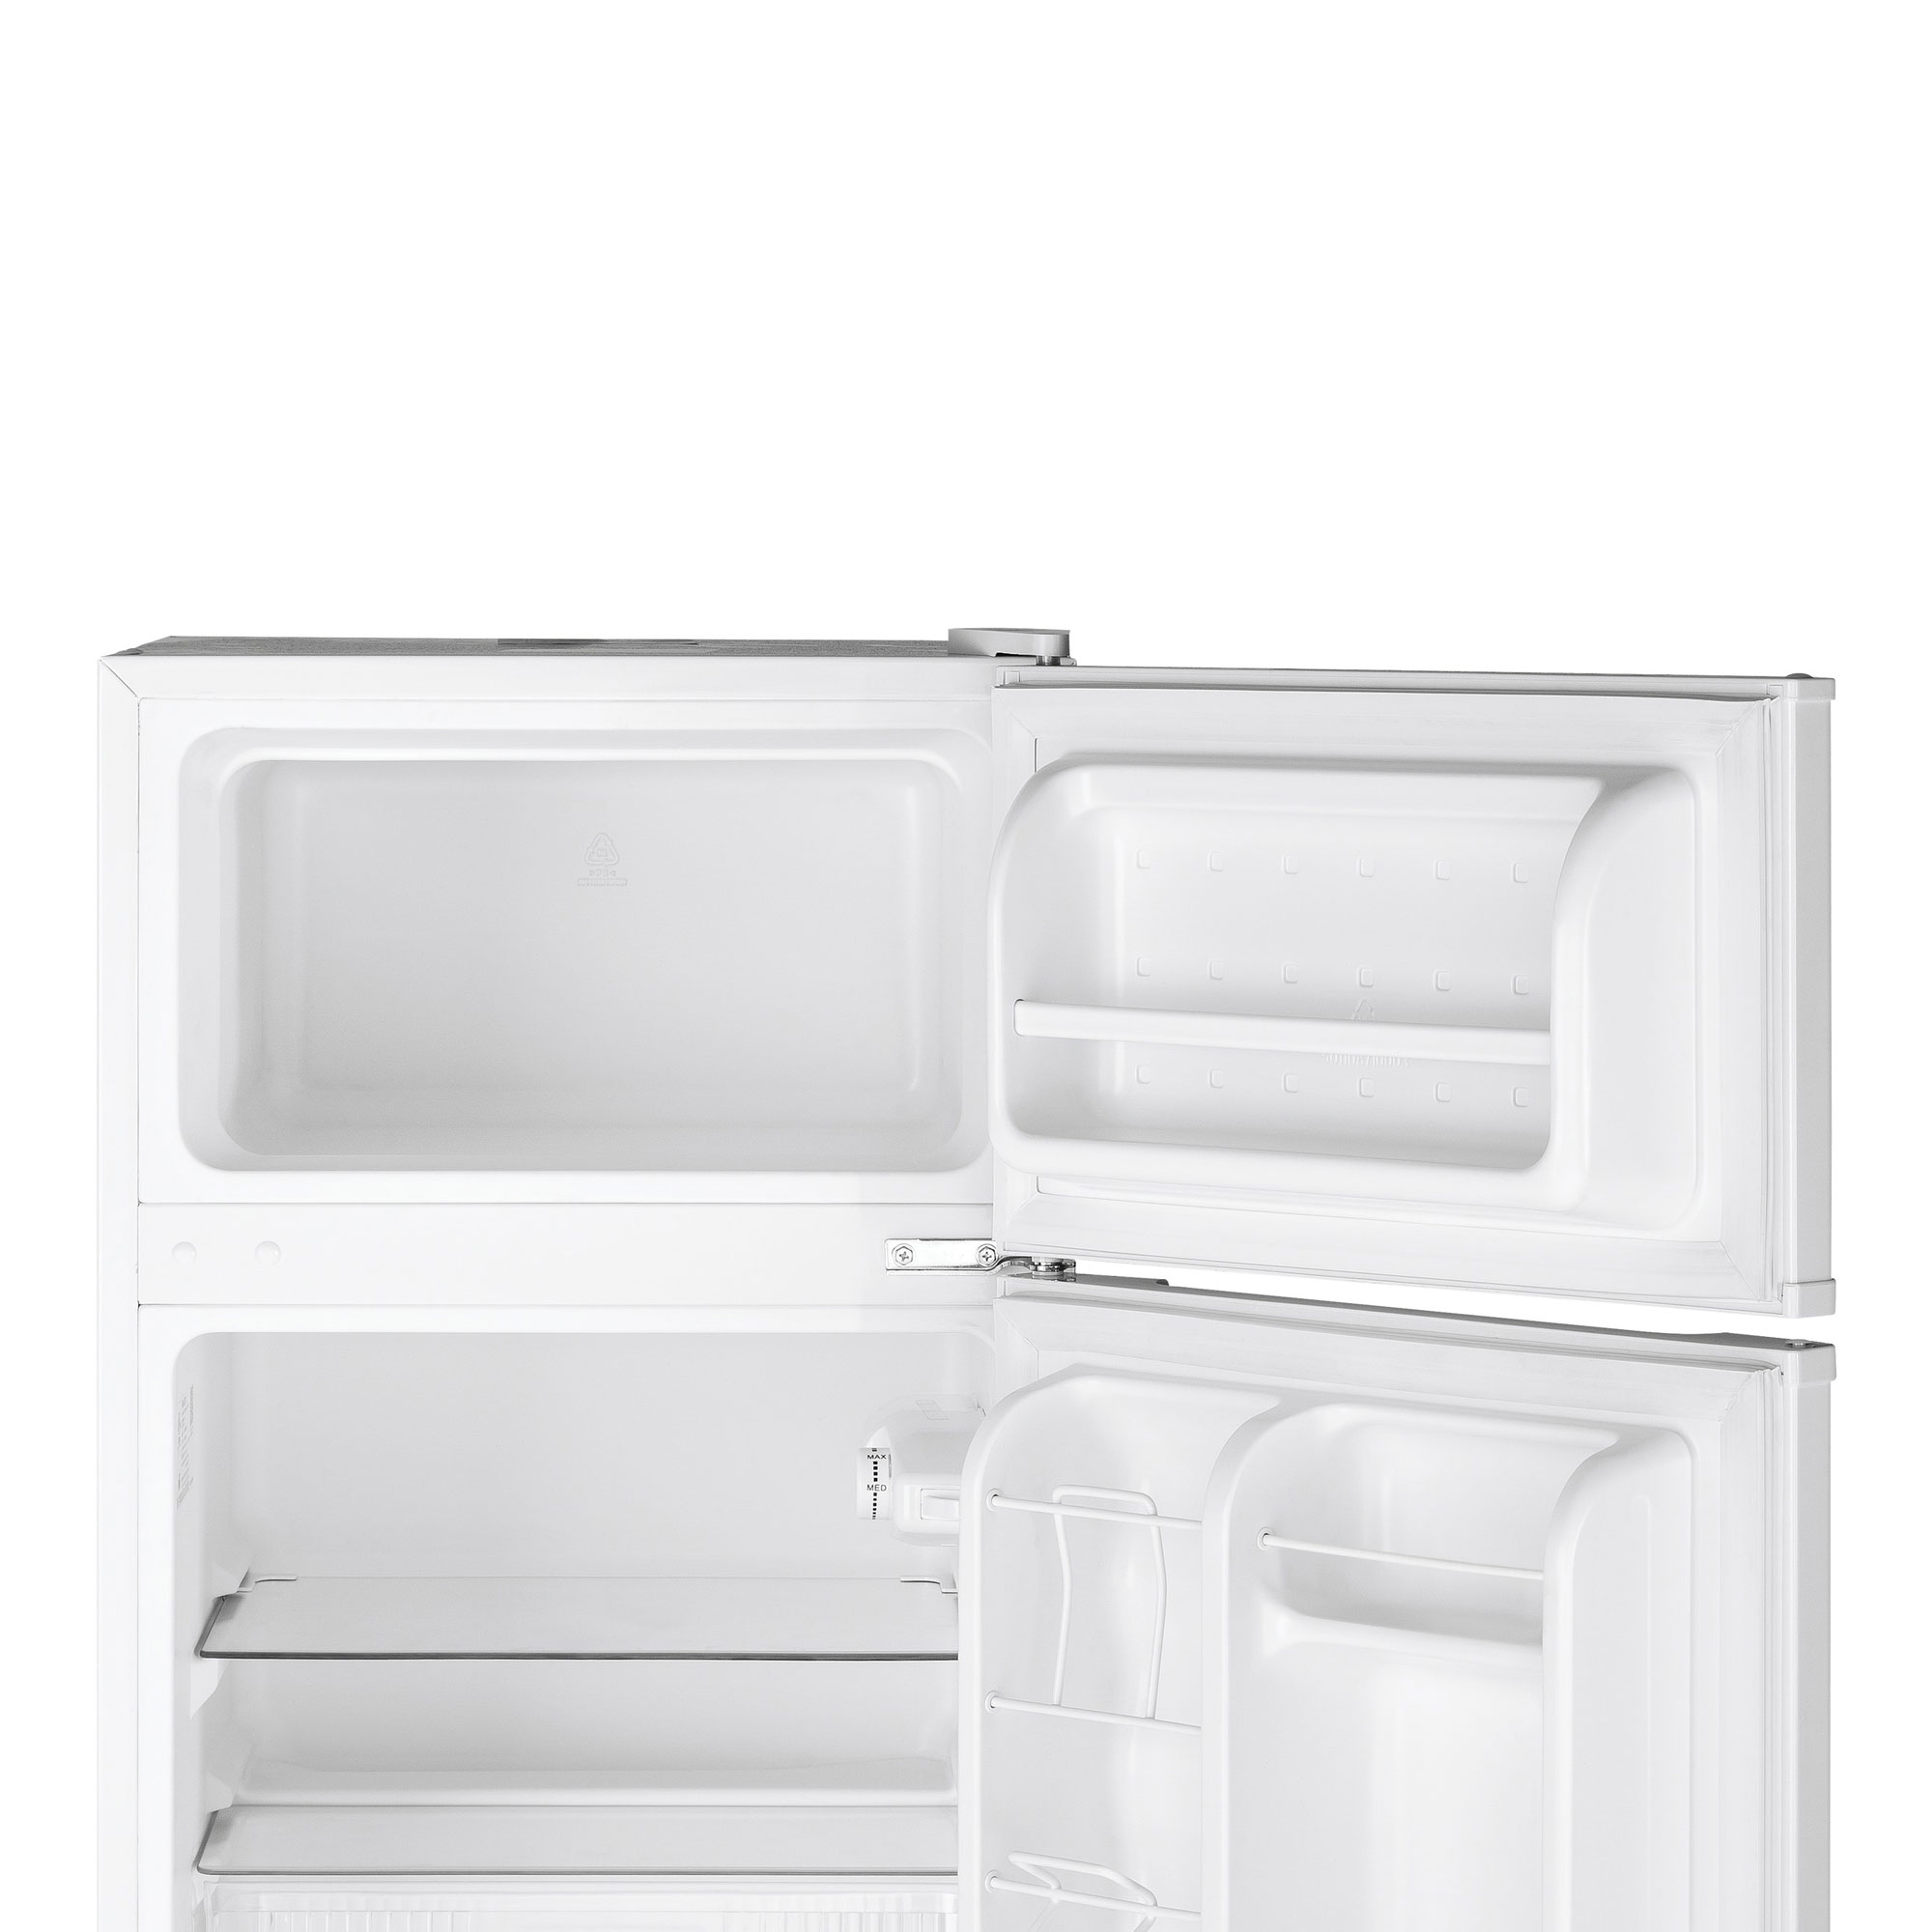 Ge Gde03gk 19" Wide 3.1 Cu. Ft. Energy Star Rated Freestanding Refrigerator - White - image 5 of 5